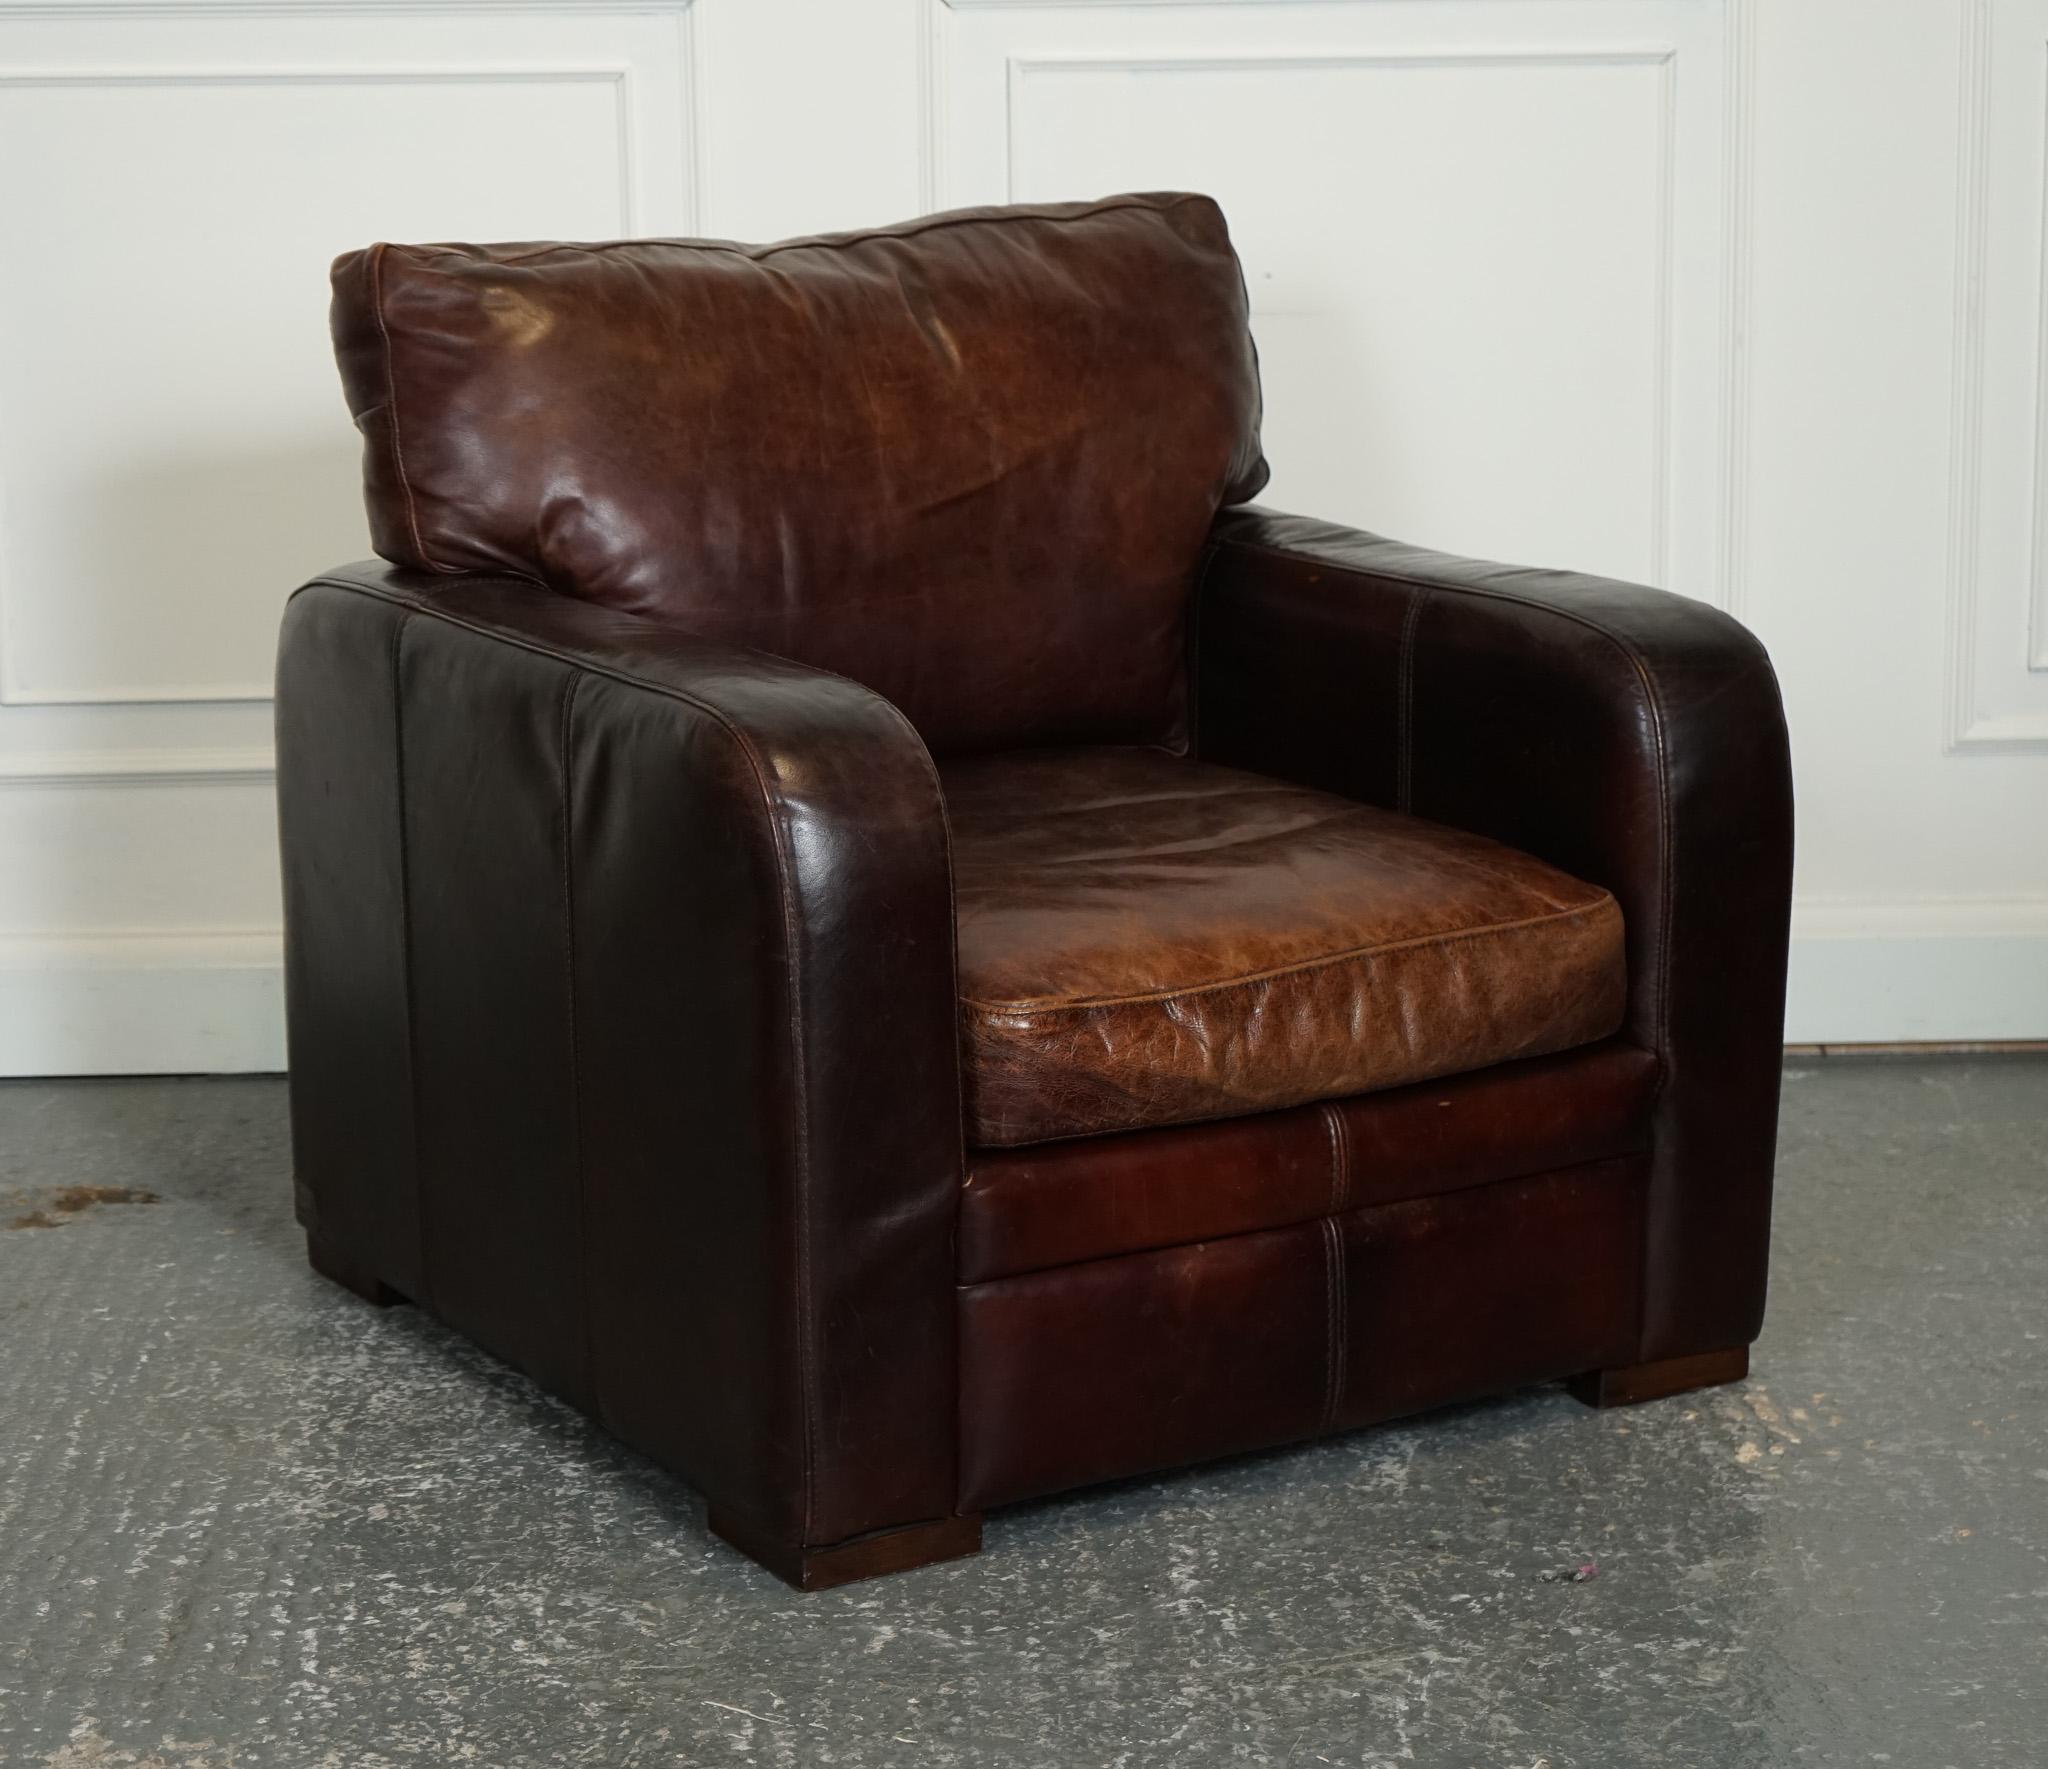 STUNNiNG VINTAGE PAIR HALO BROWN AGED LEATHER CLUB ARMCHAIRS J1 5